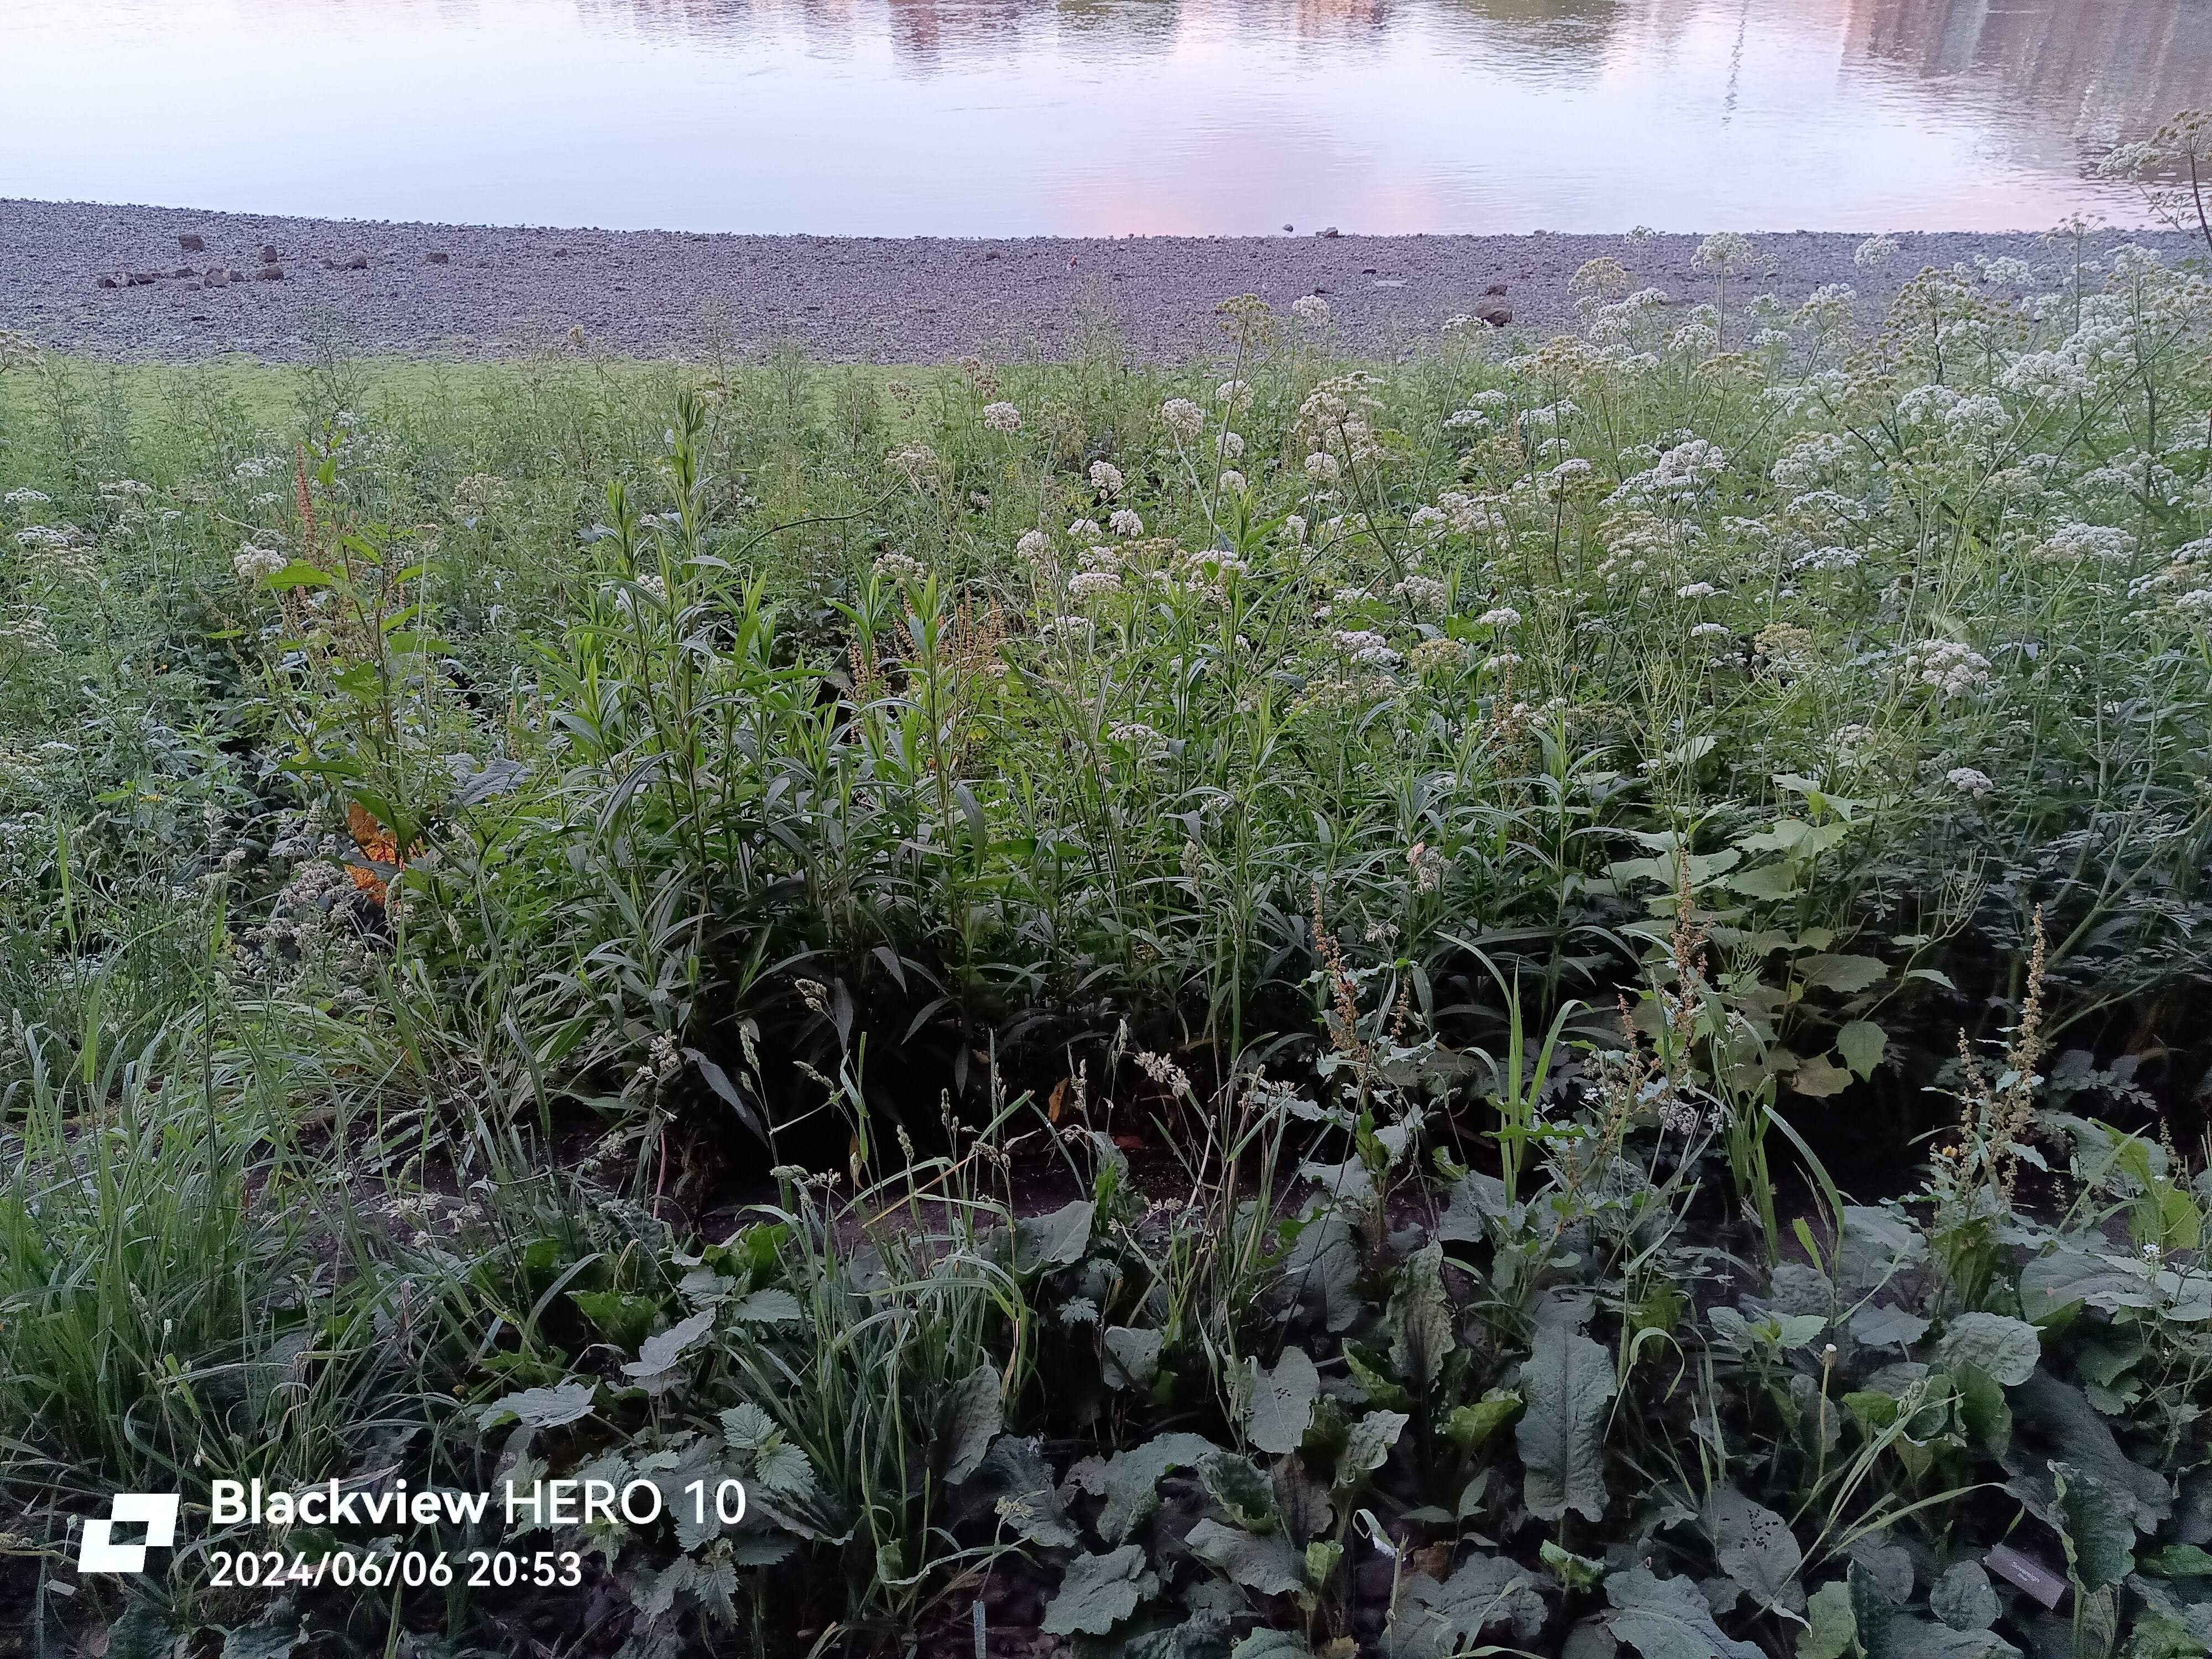 Picture of foliage on Thames river bank